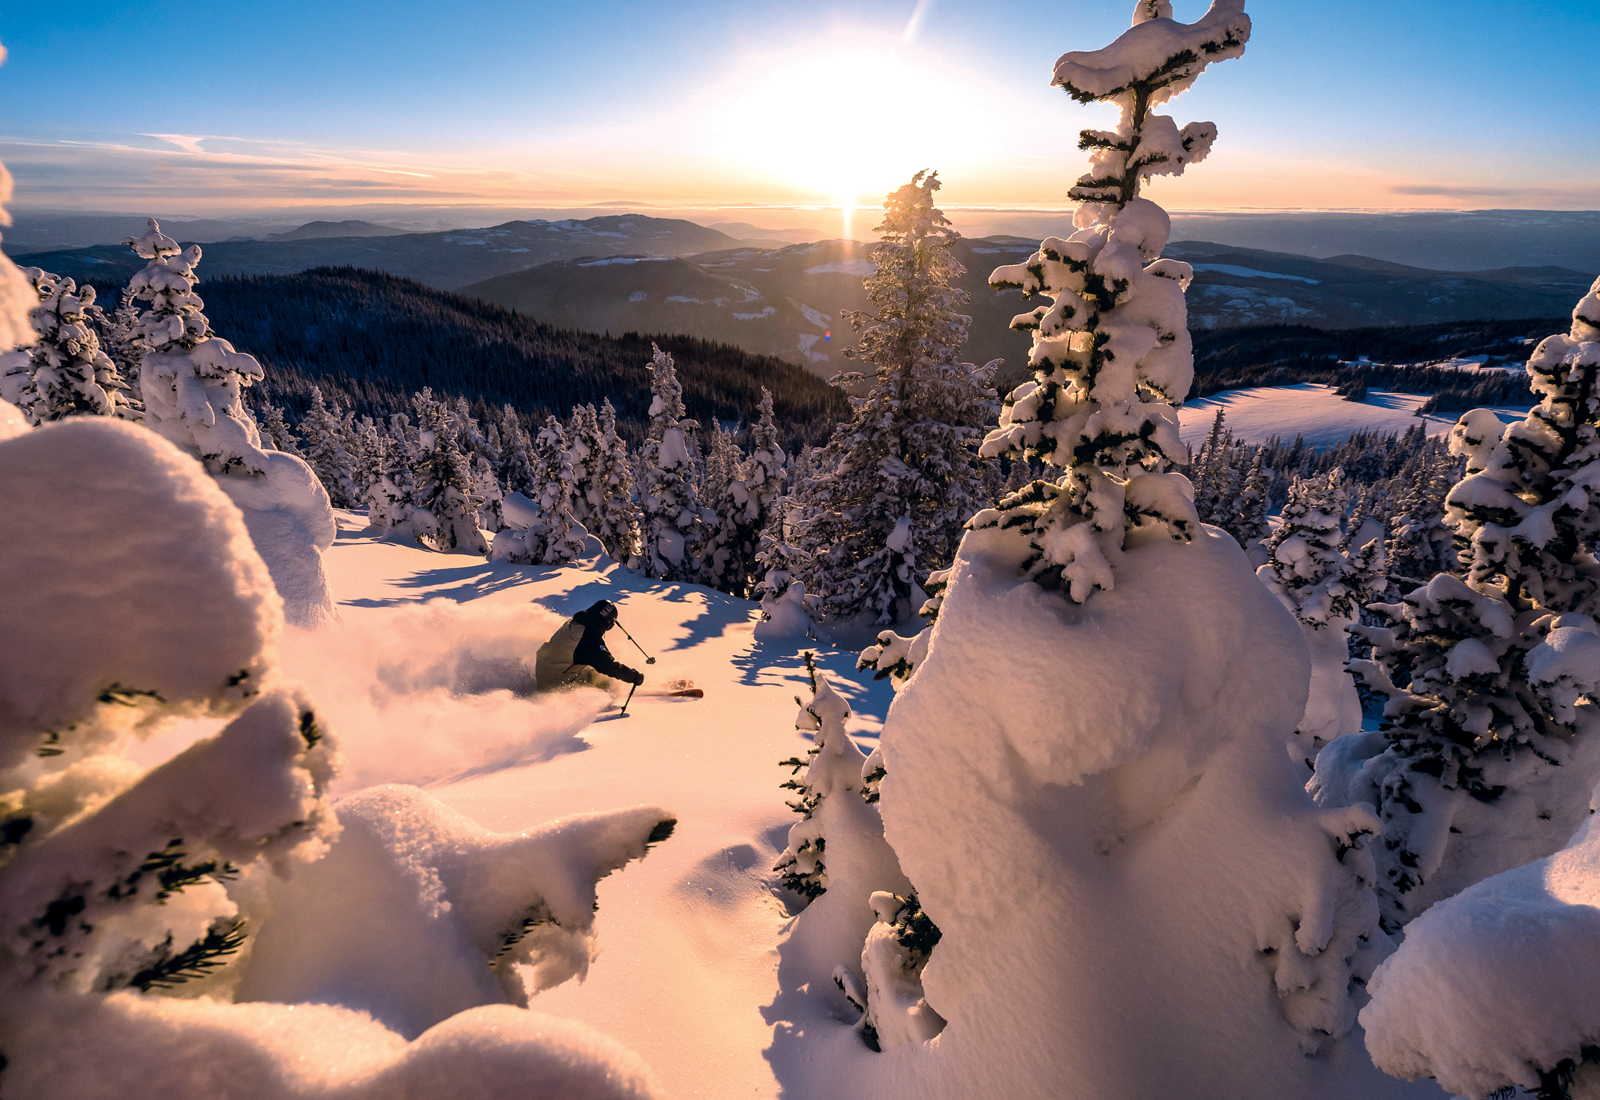 Sun Peaks in all of its early morning glory. Photo by Reuben Krabbe.